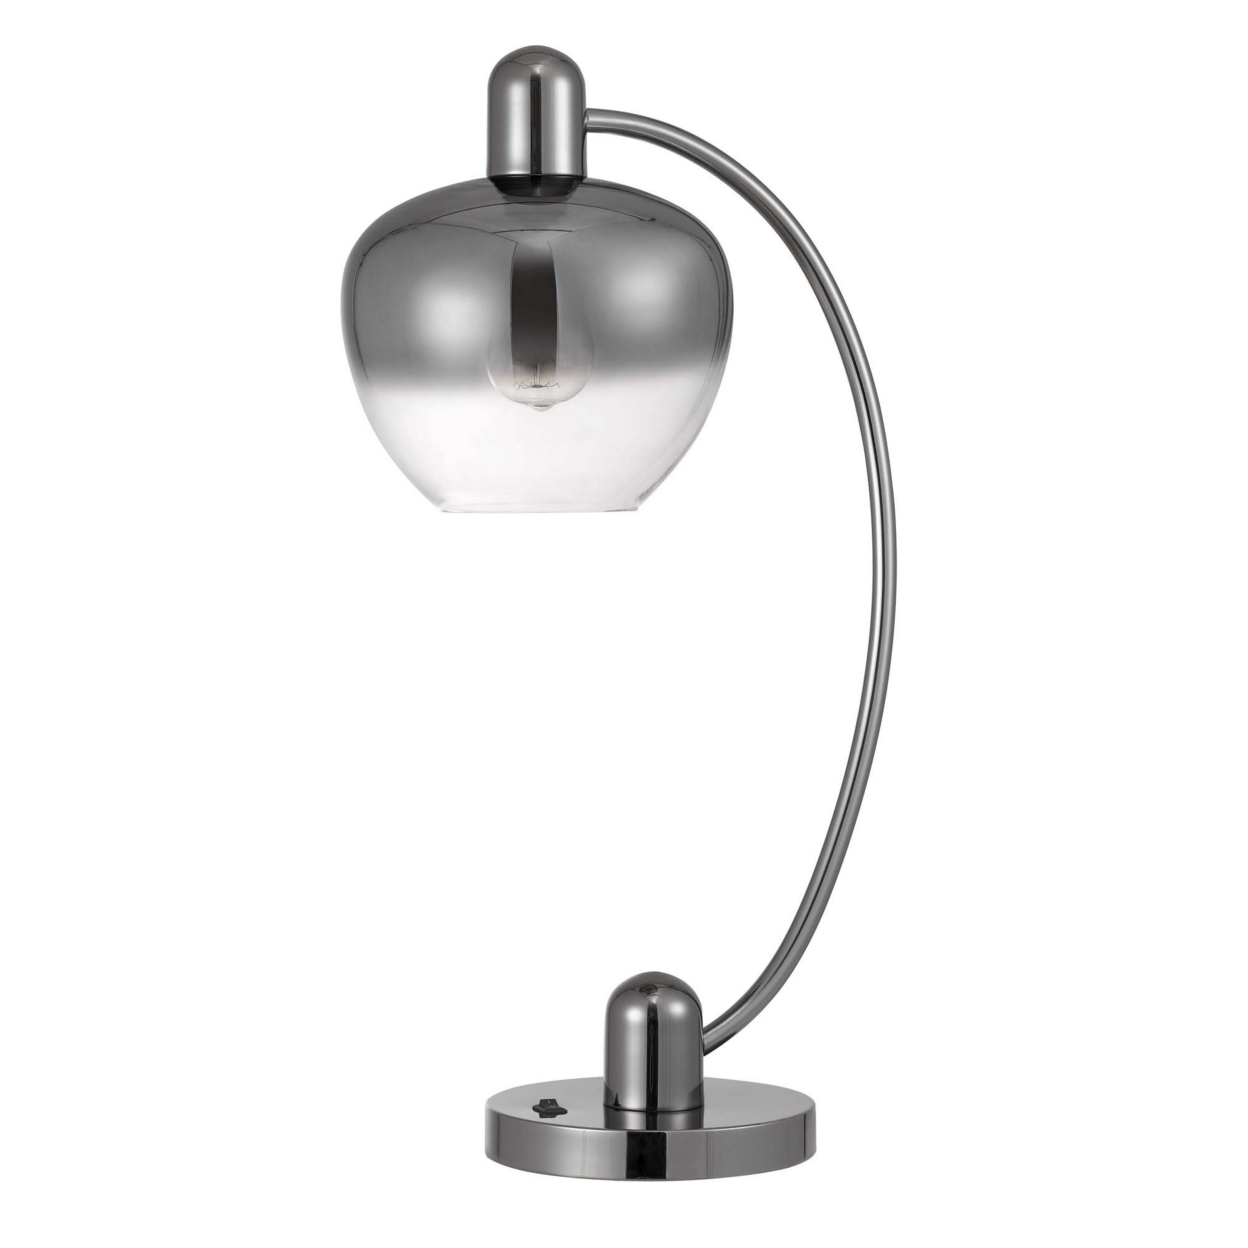 Table Lamp With Glass Shade And Arc Metal Frame, Silver- Saltoro Sherpi